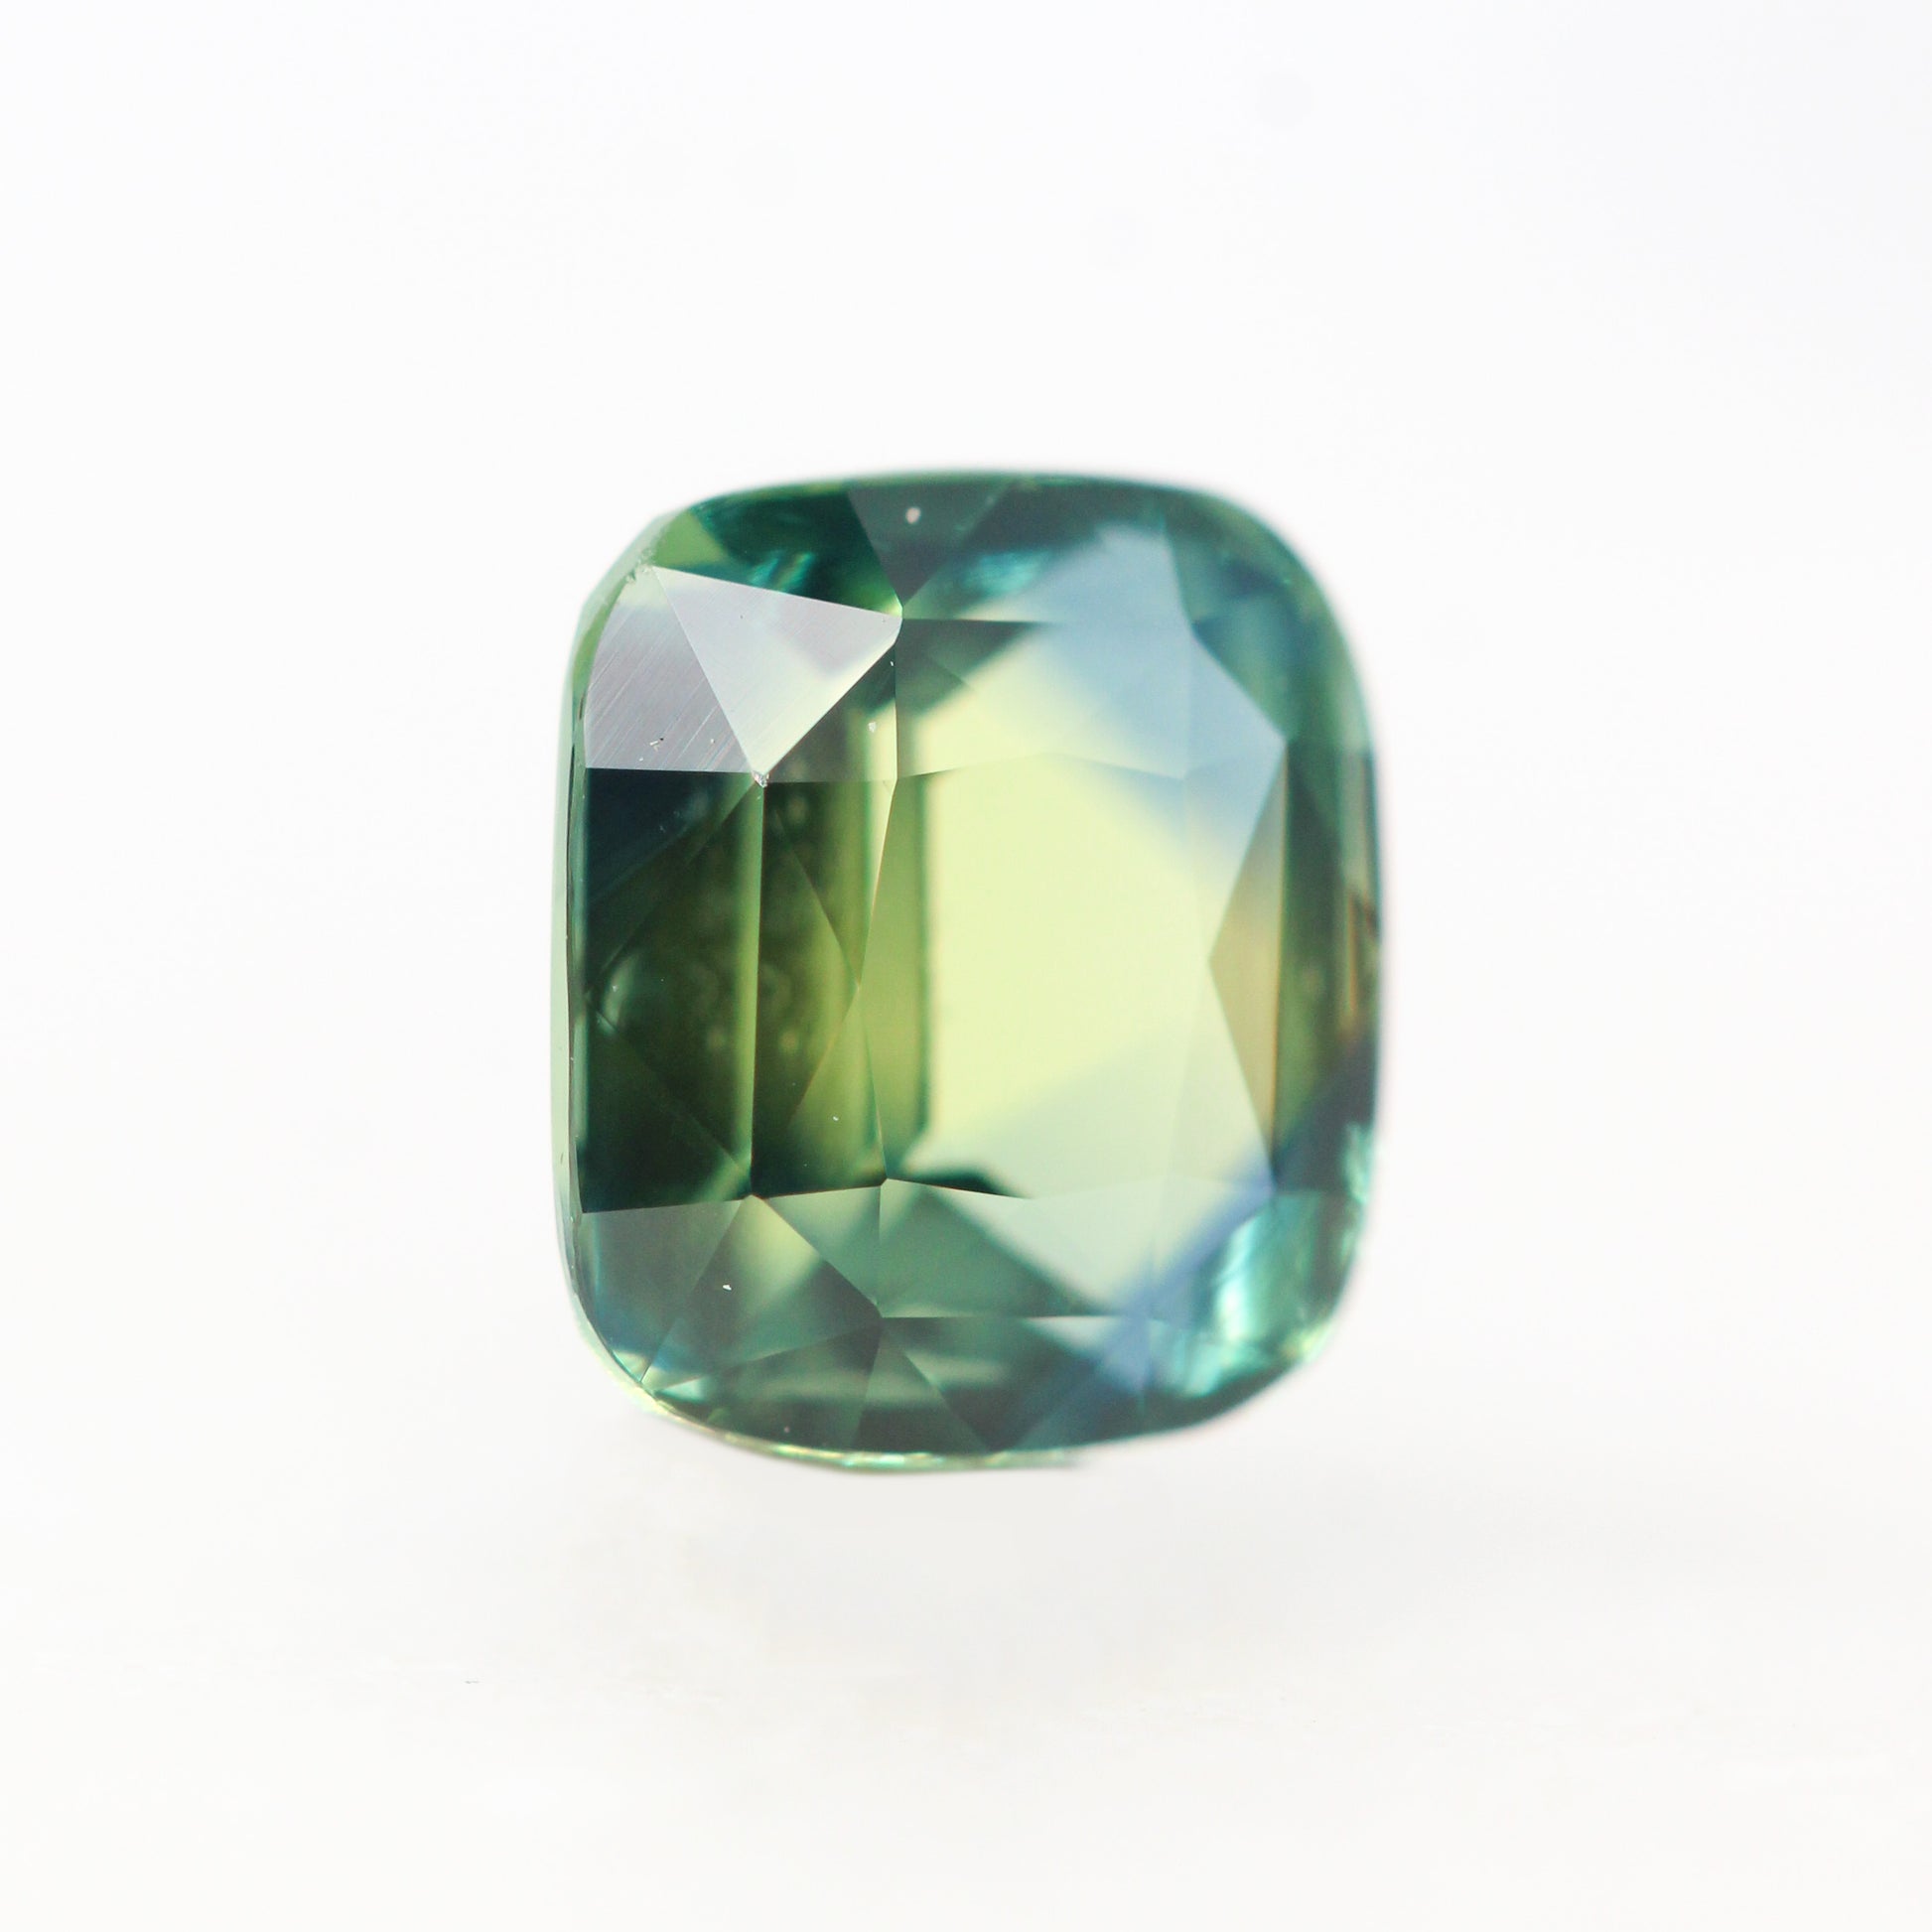 1.07 Carat Elongated Cushion Cut Teal Sapphire for Custom Work - Inventory Code ETS107 - Midwinter Co. Alternative Bridal Rings and Modern Fine Jewelry